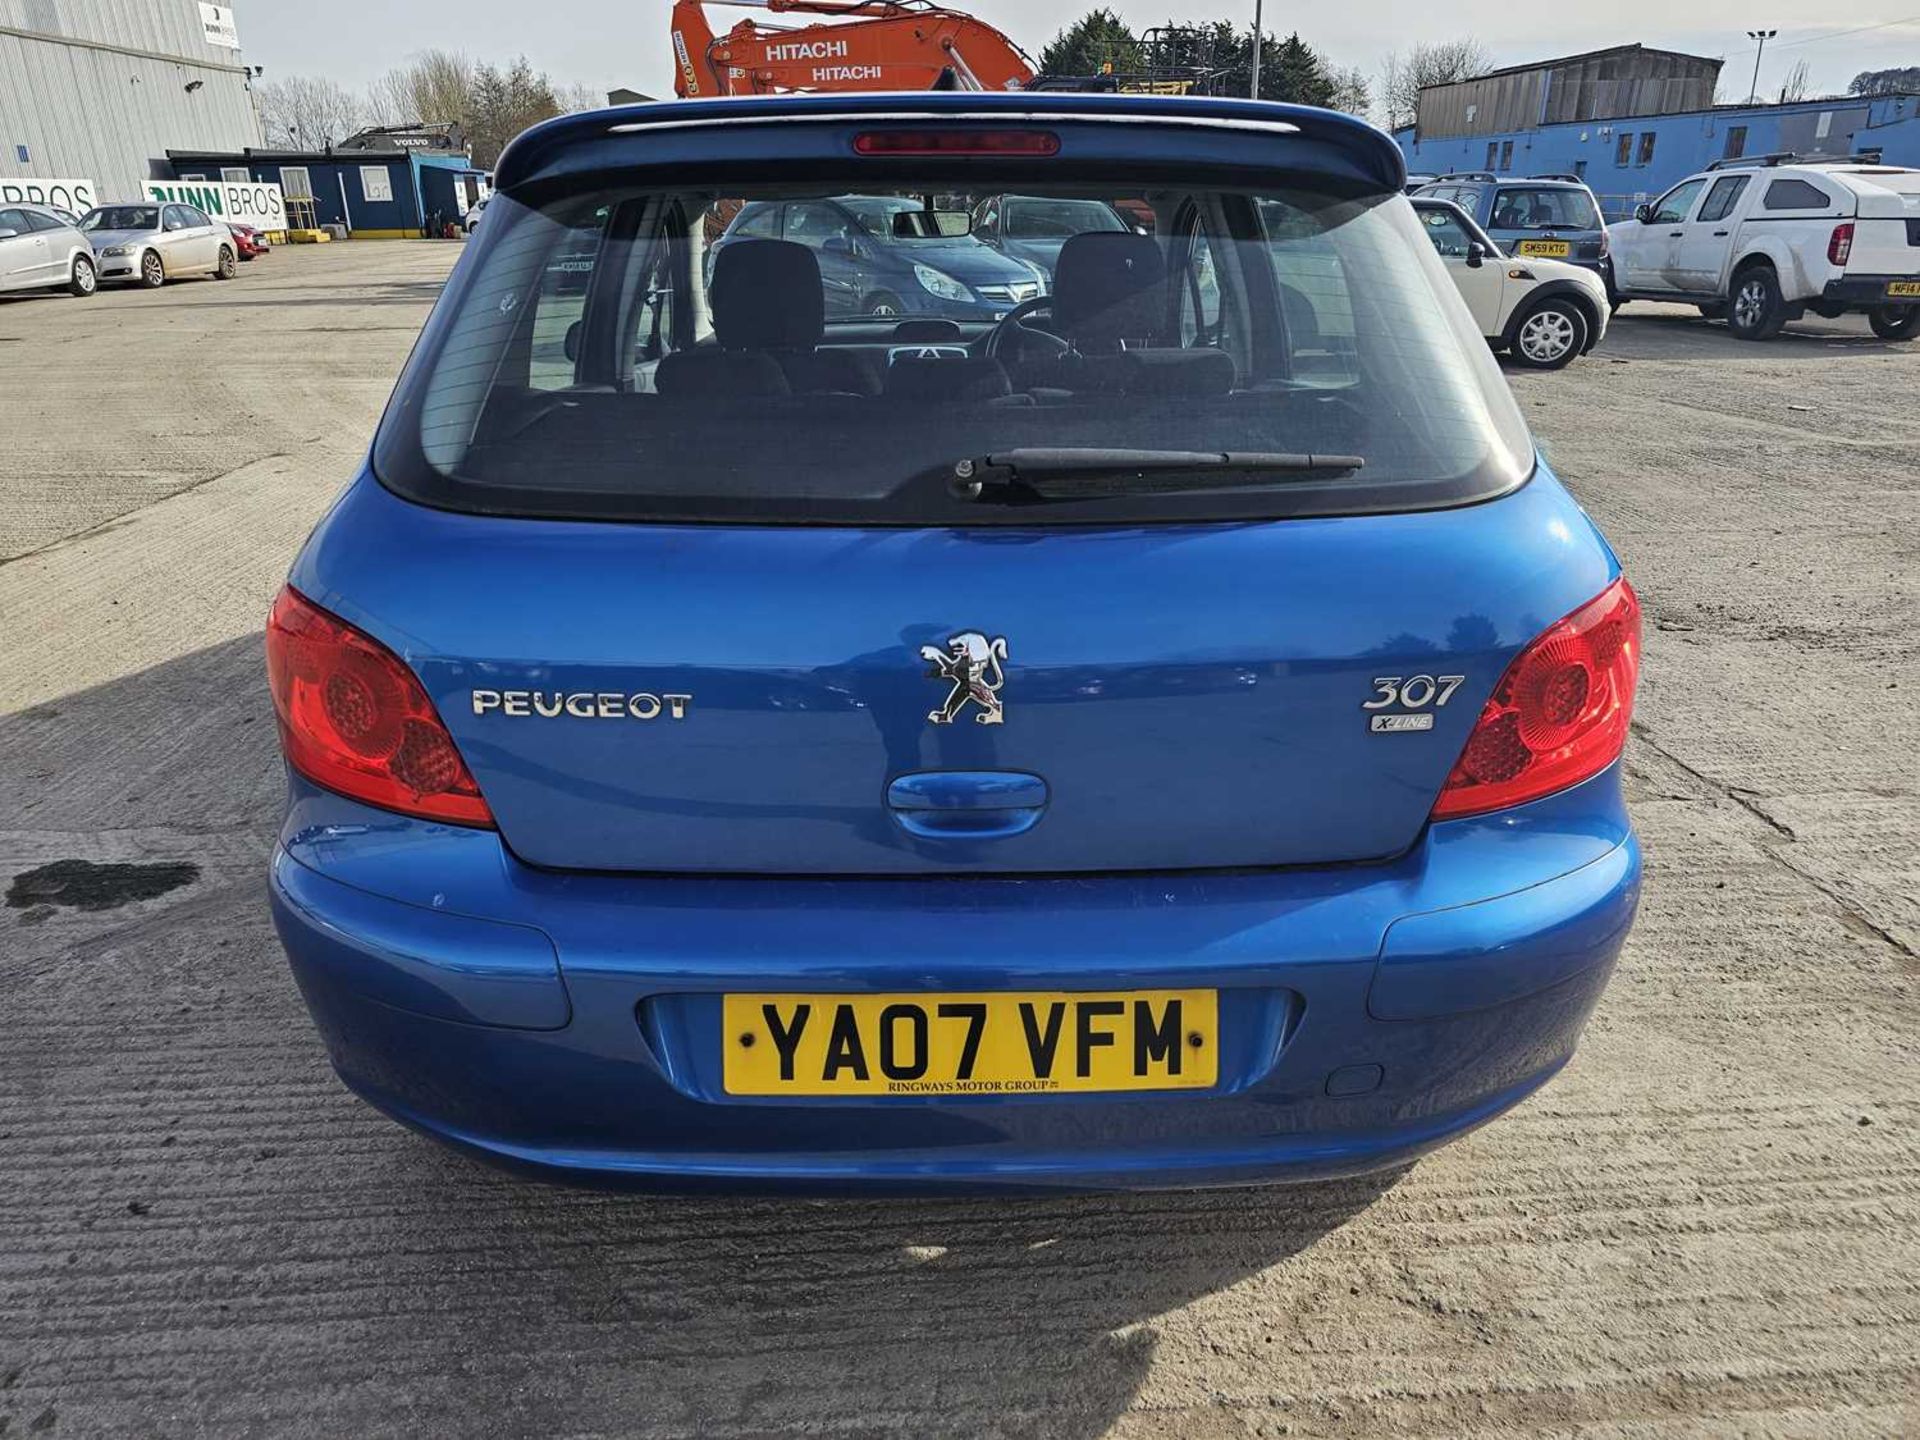 2007 Peugeot 307 X-line, 5 Speed, A/C (Reg. Docs. & Service History Available, Tested 07/24) - Image 31 of 56